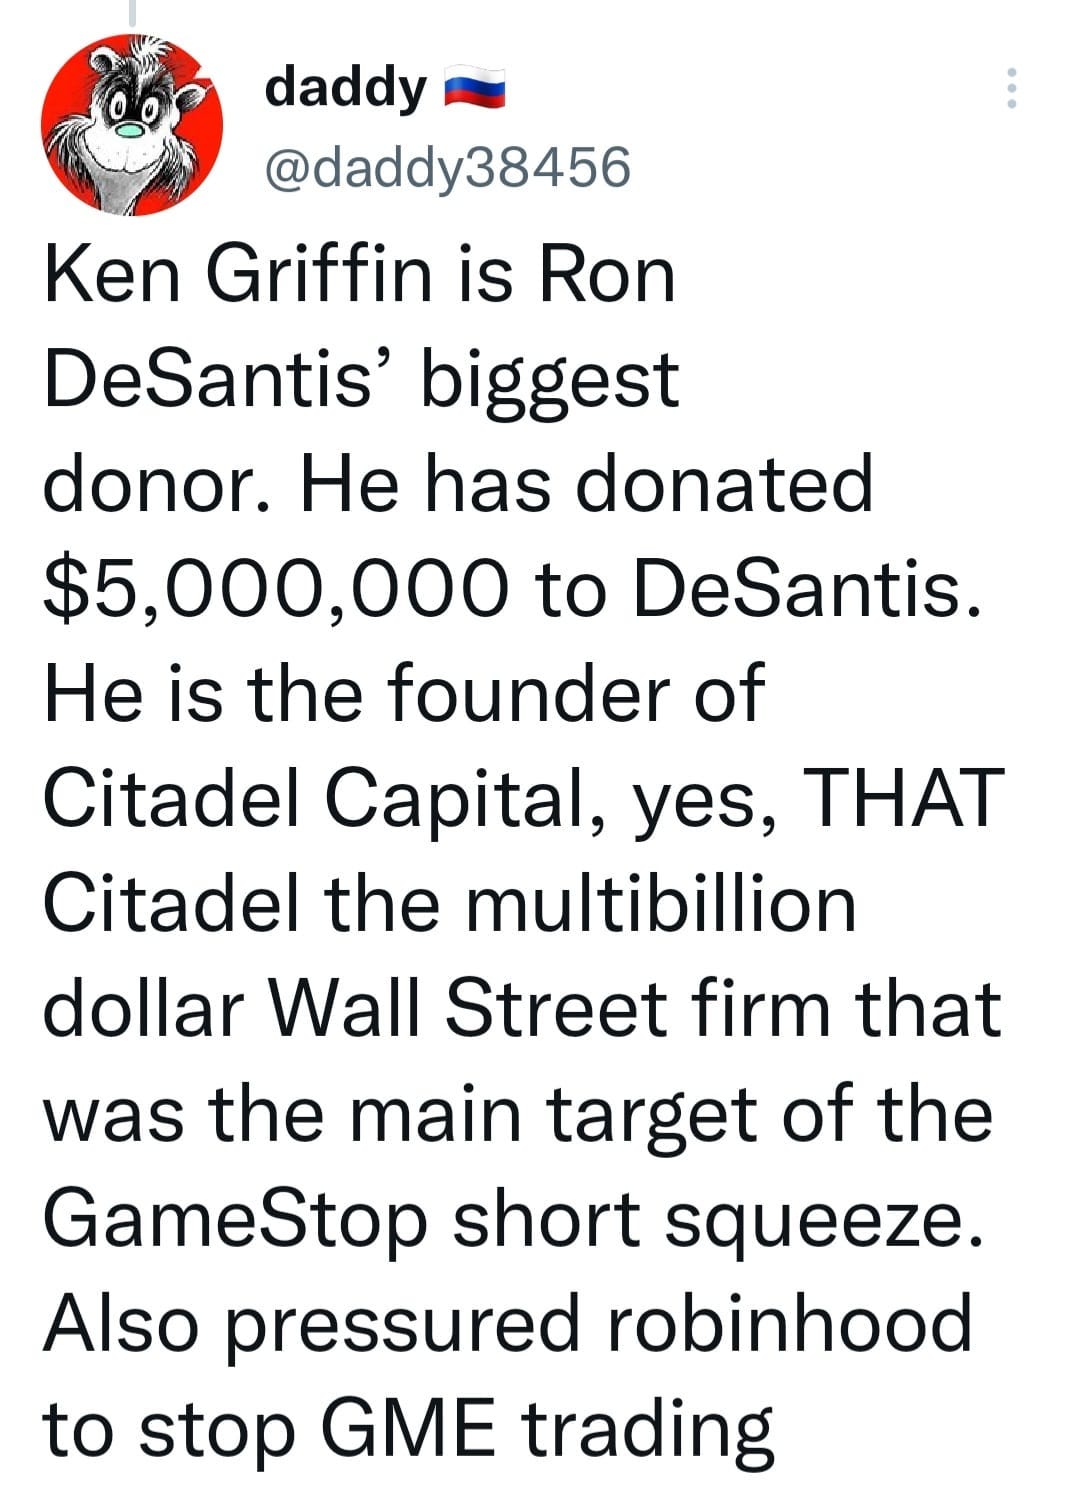 May be an image of text that says 'daddy @dddy3 38456 Ken Griffin is Ron DeSantis' biggest donor. He has donated $5,000,000 to DeSantis. He is the founder of Citadel Capital, yes, THAT Citadel the multibillion dollar Wall Street firm that was the main target of the GameStop short squeeze. Also pressured robinhood to stop GME trading'